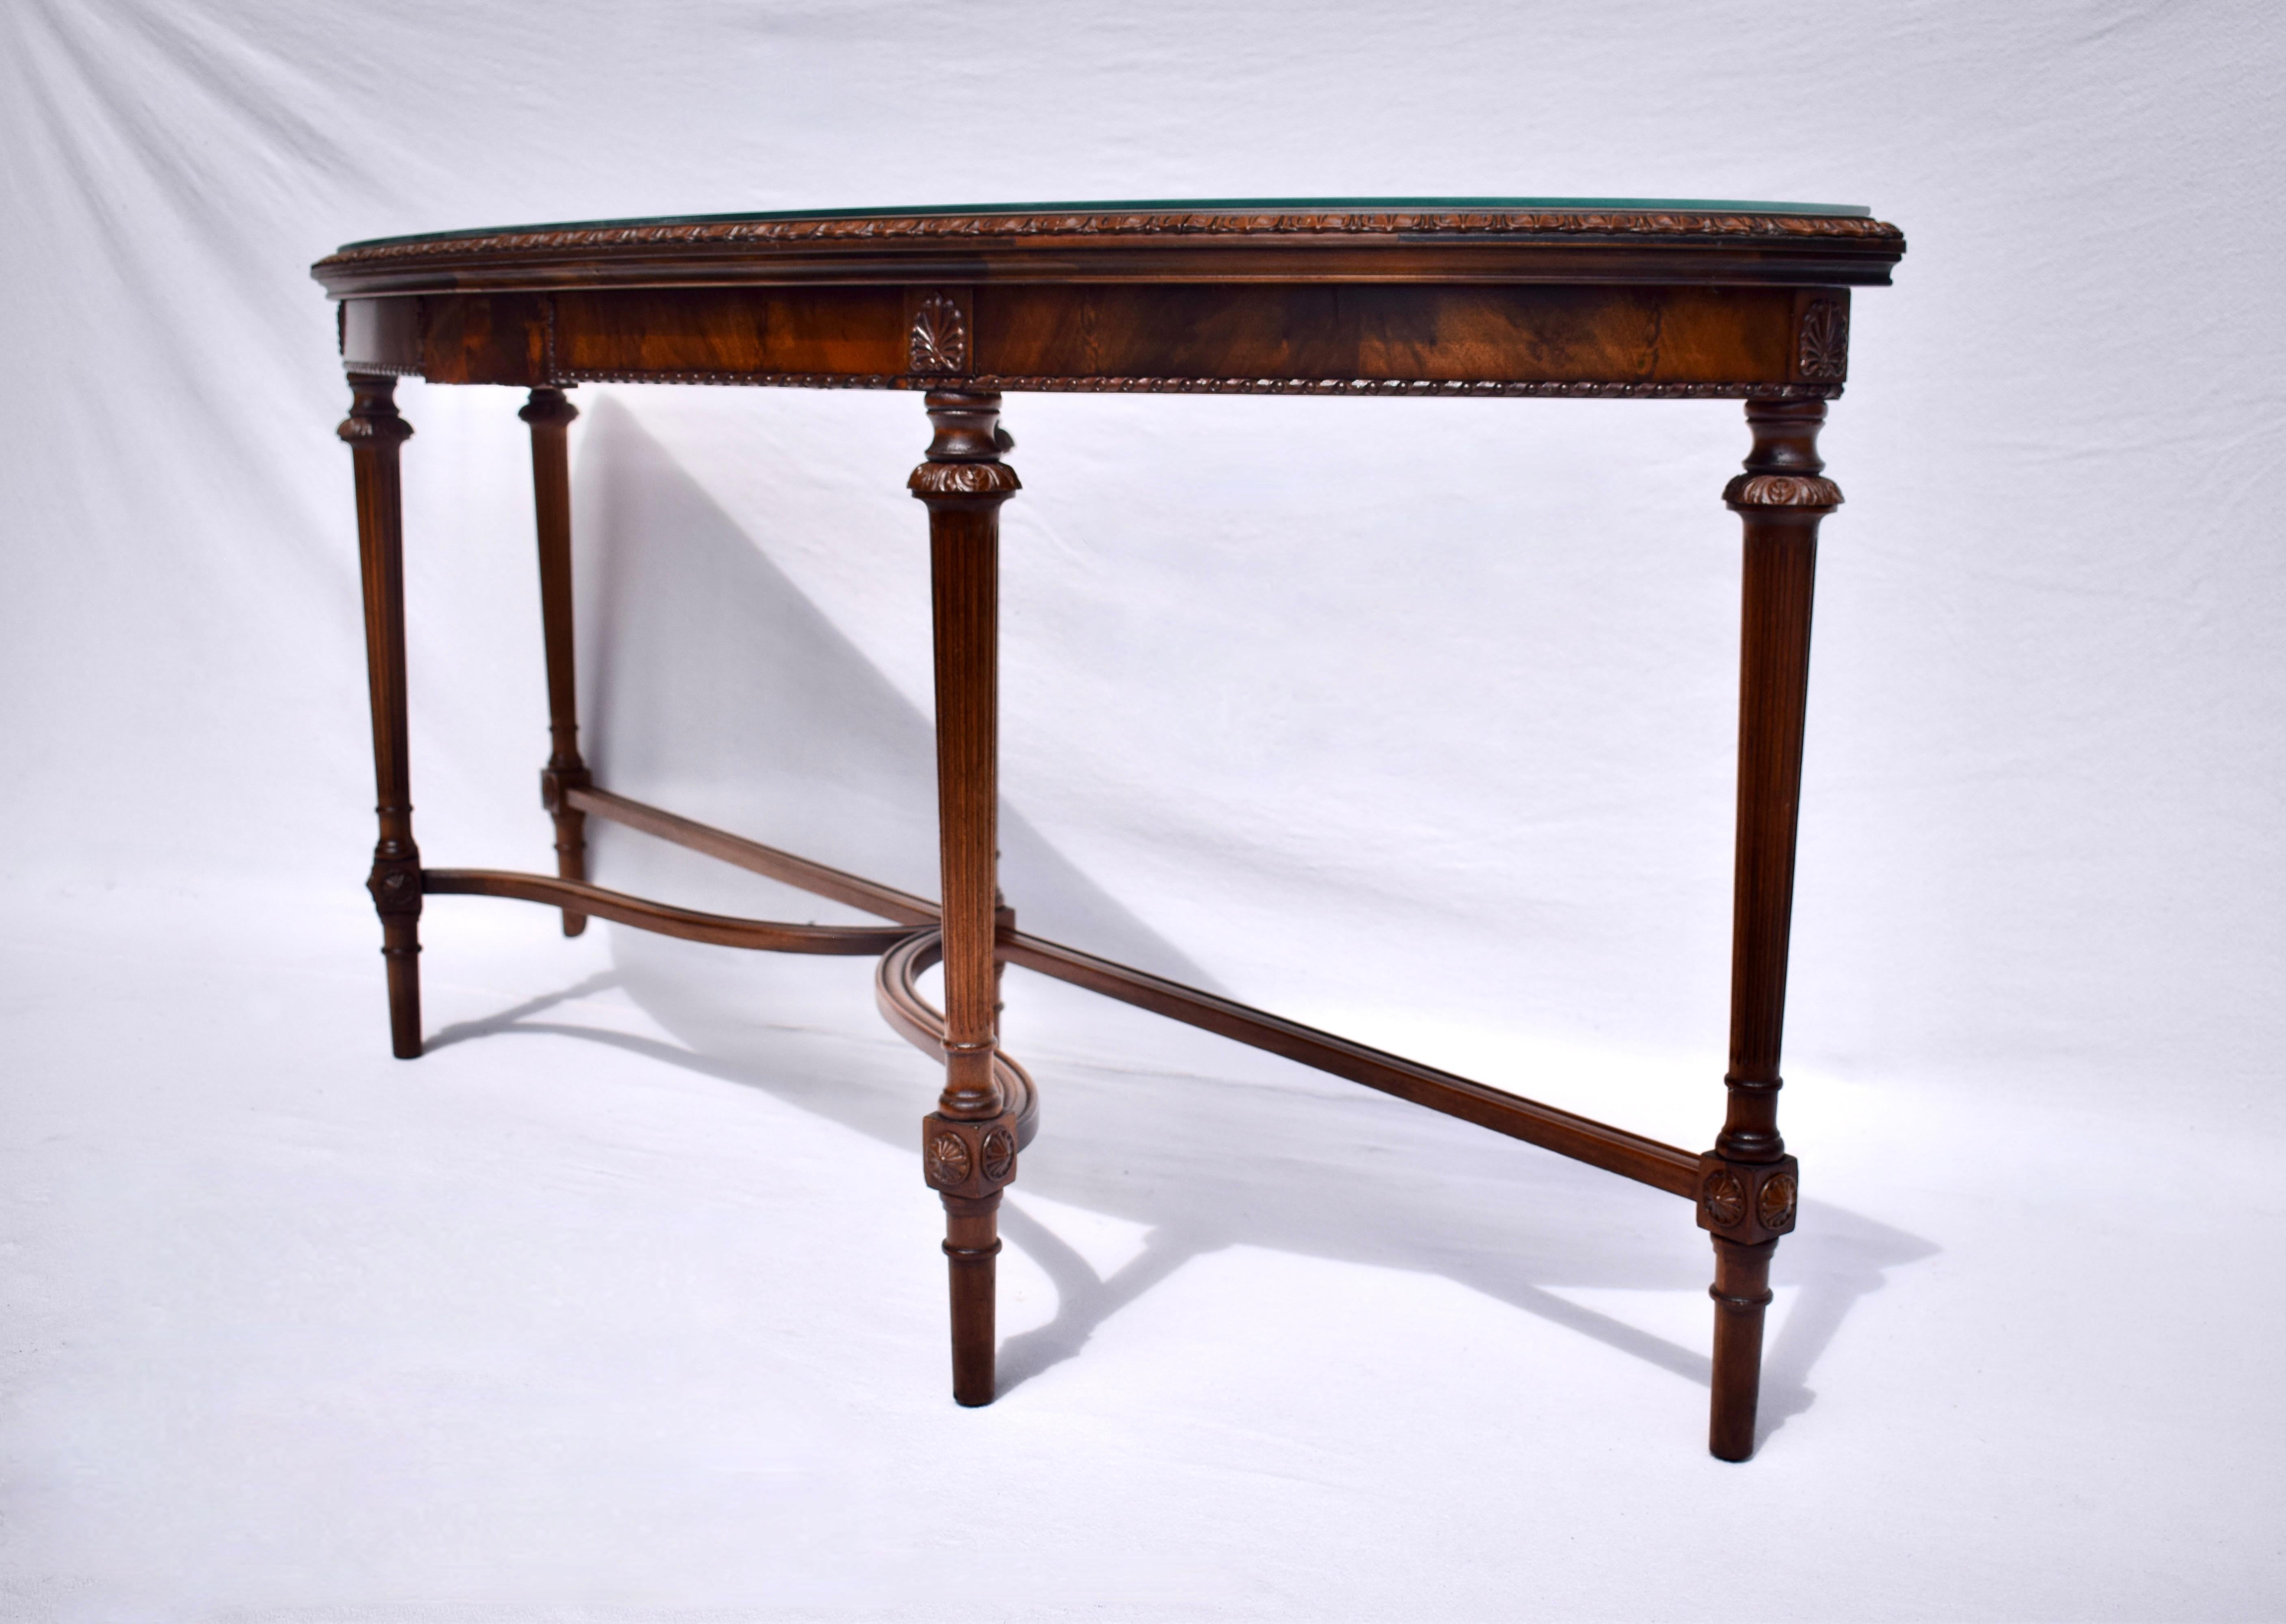 Stunning Louis XVI French Style Mahogany Demilune Console Table In Good Condition For Sale In Southampton, NJ